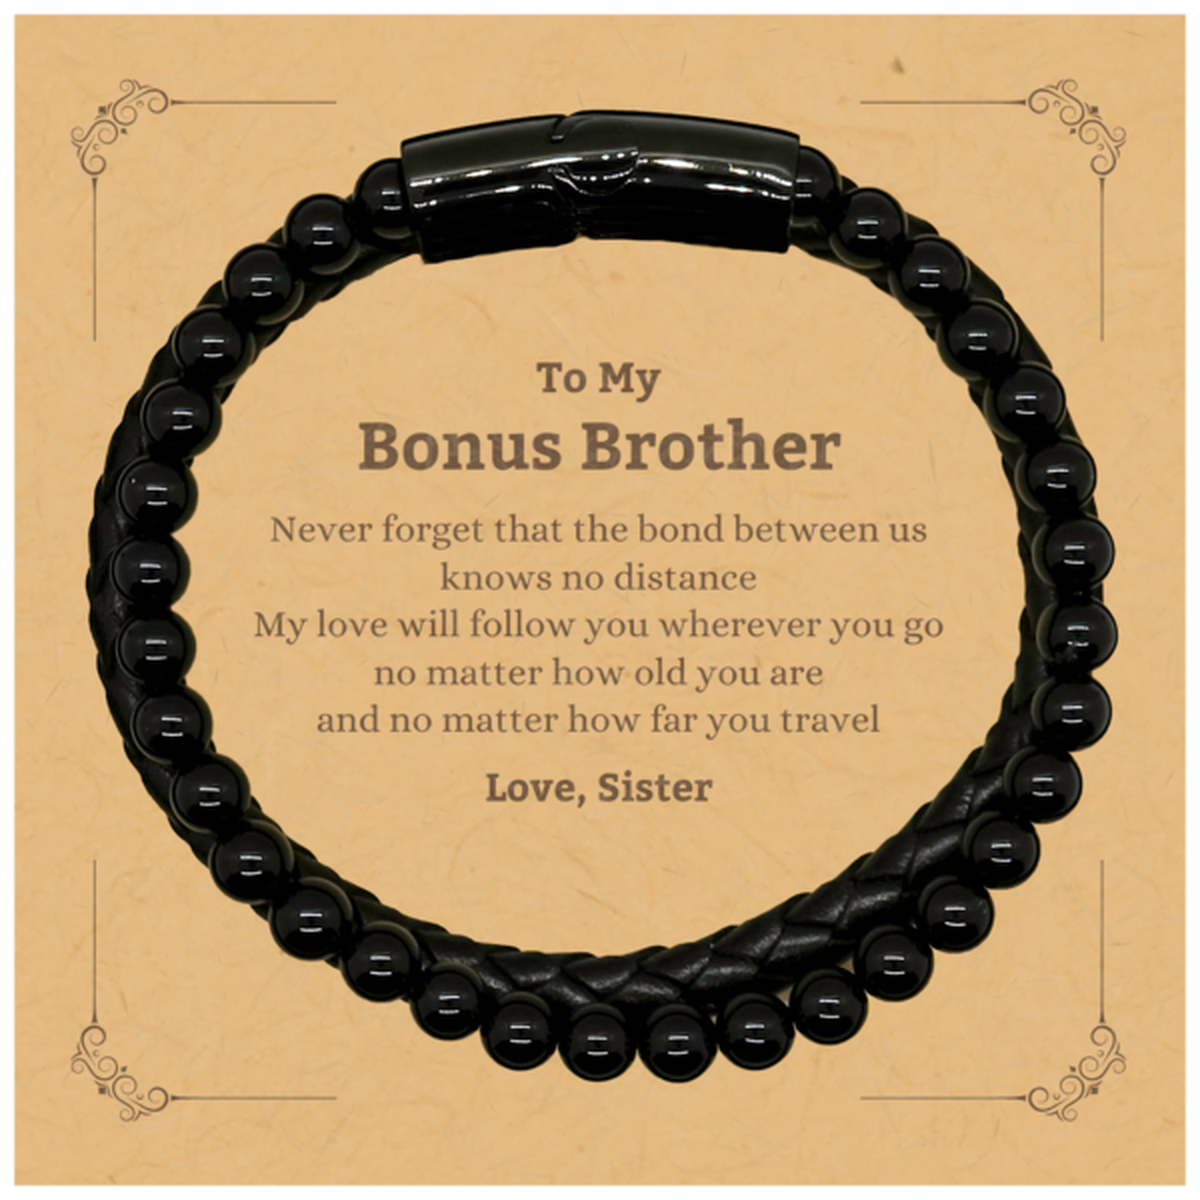 Bonus Brother Birthday Gifts from Sister, Adjustable Stone Leather Bracelets for Bonus Brother Christmas Graduation Unique Gifts Bonus Brother Never forget that the bond between us knows no distance. Love, Sister